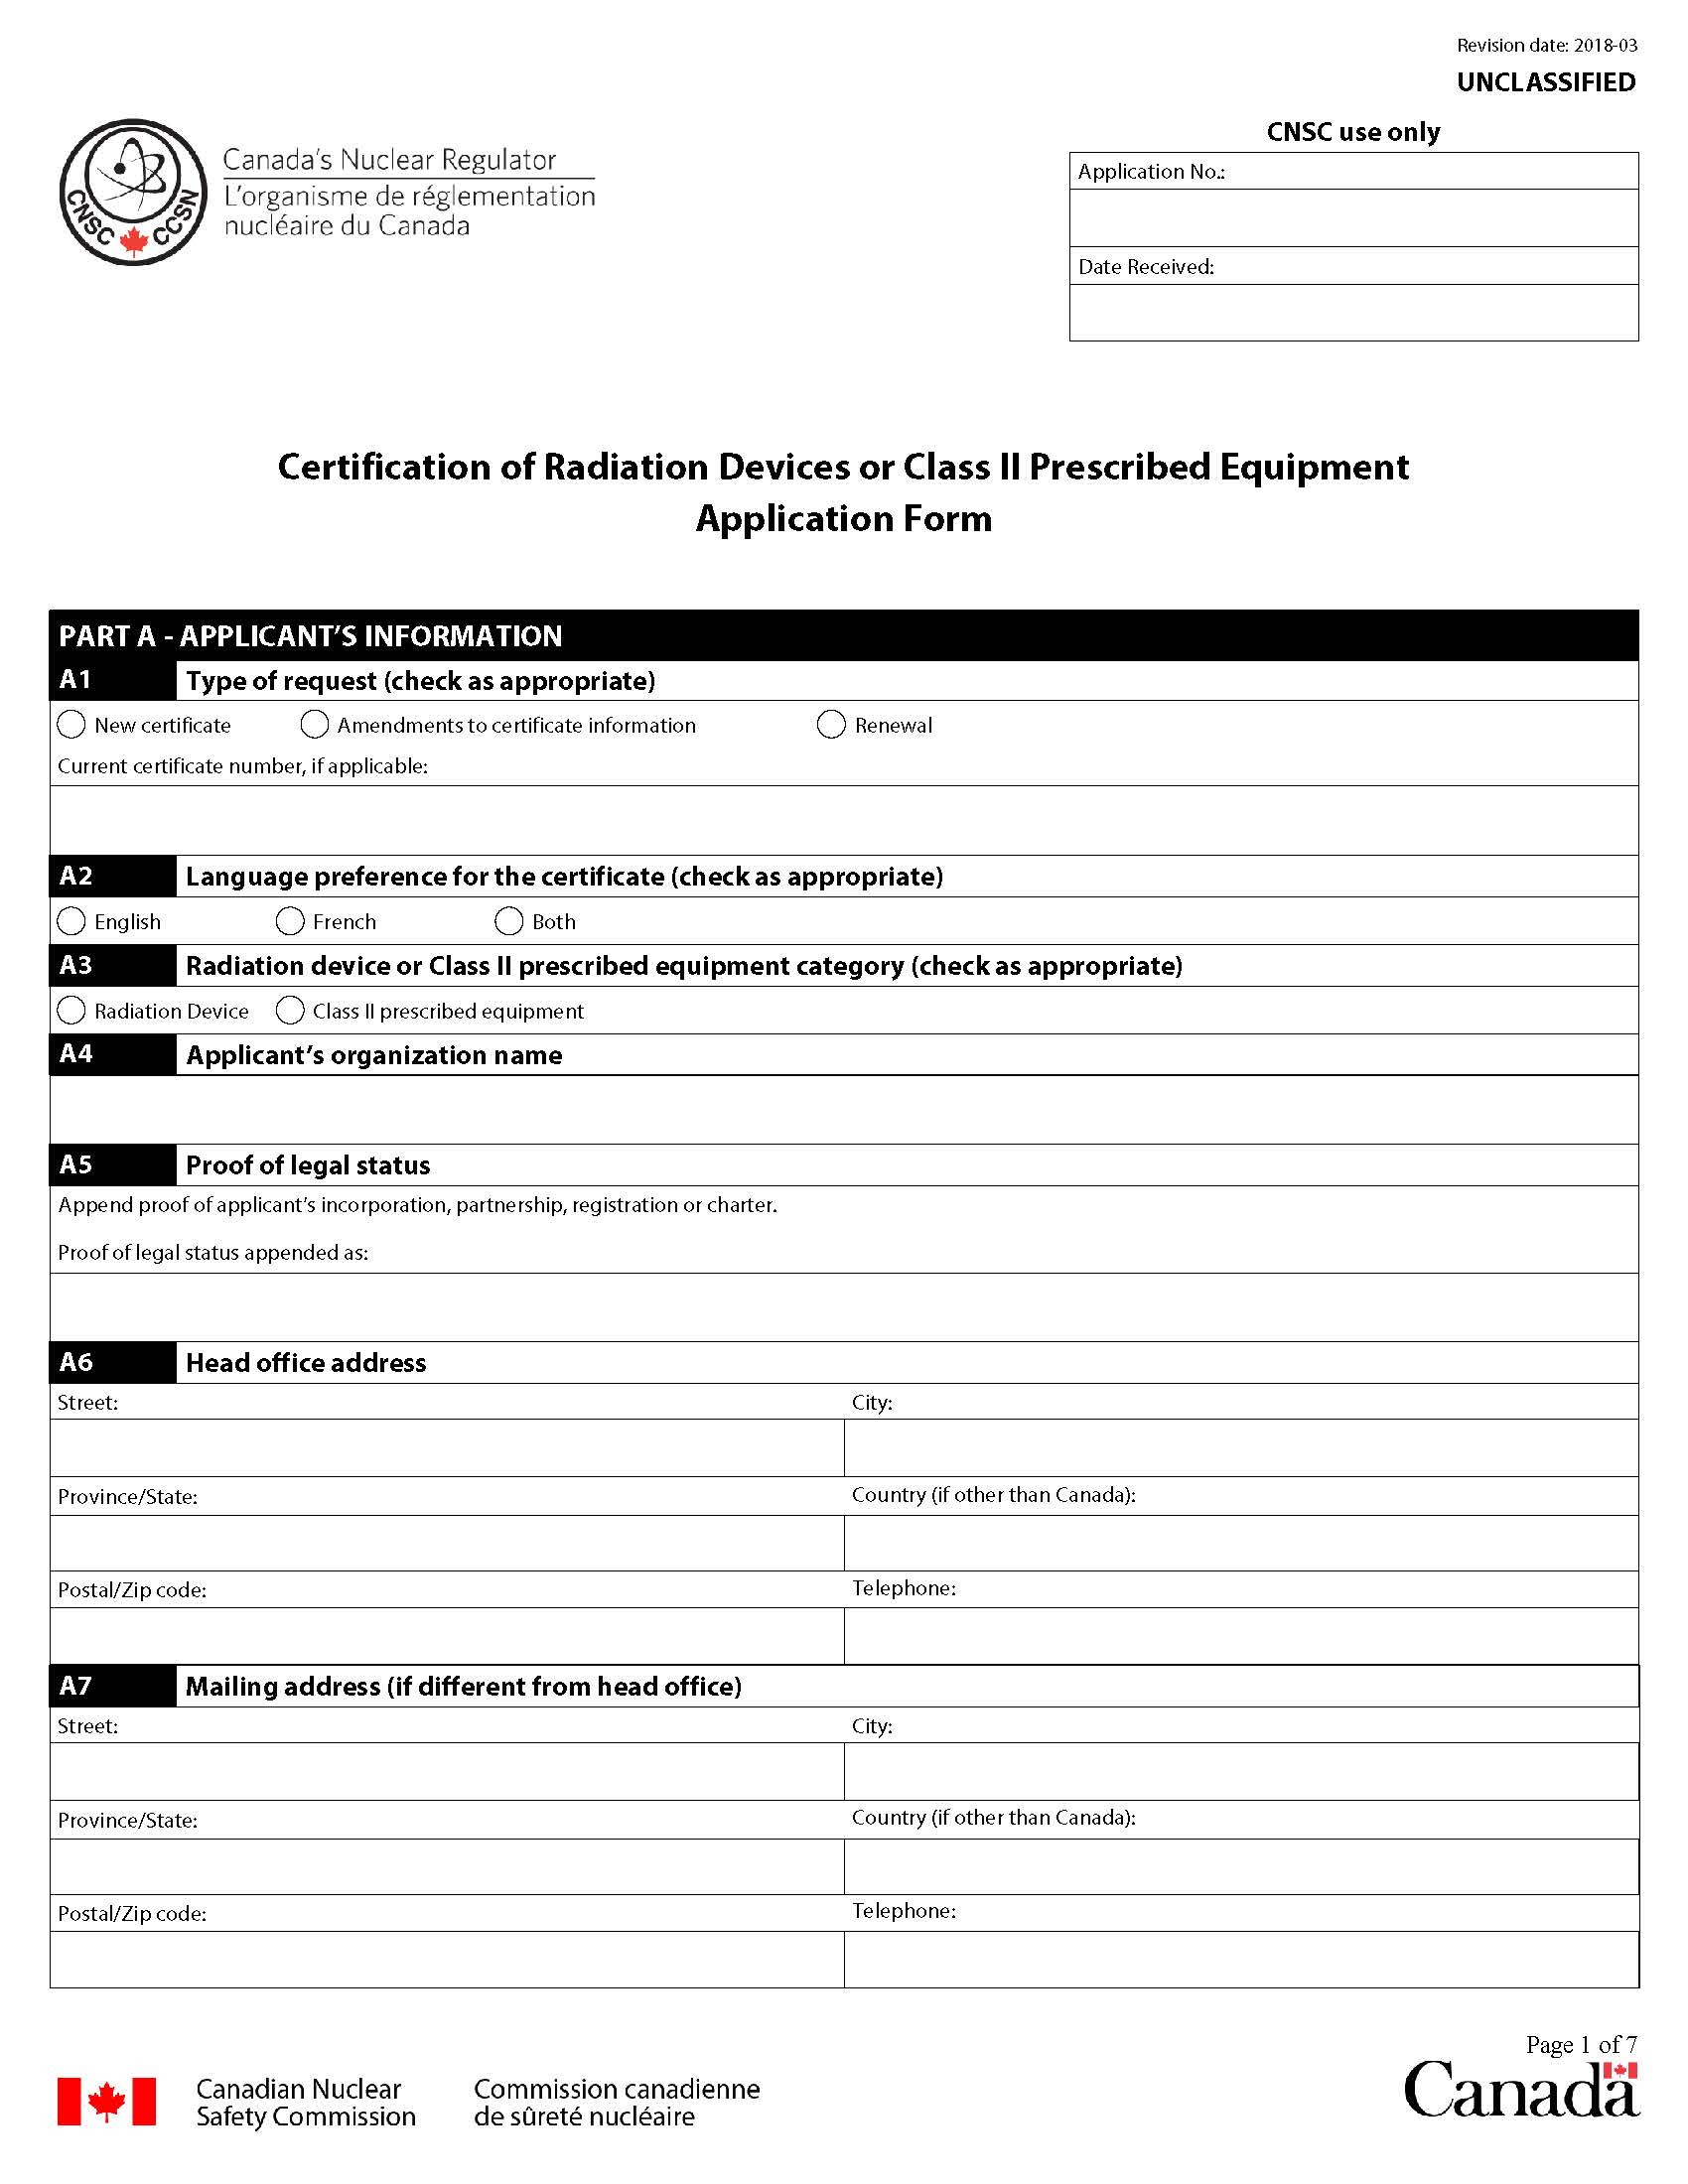 Application form for certification of radiation devices or Class II prescribed equipment: page 1